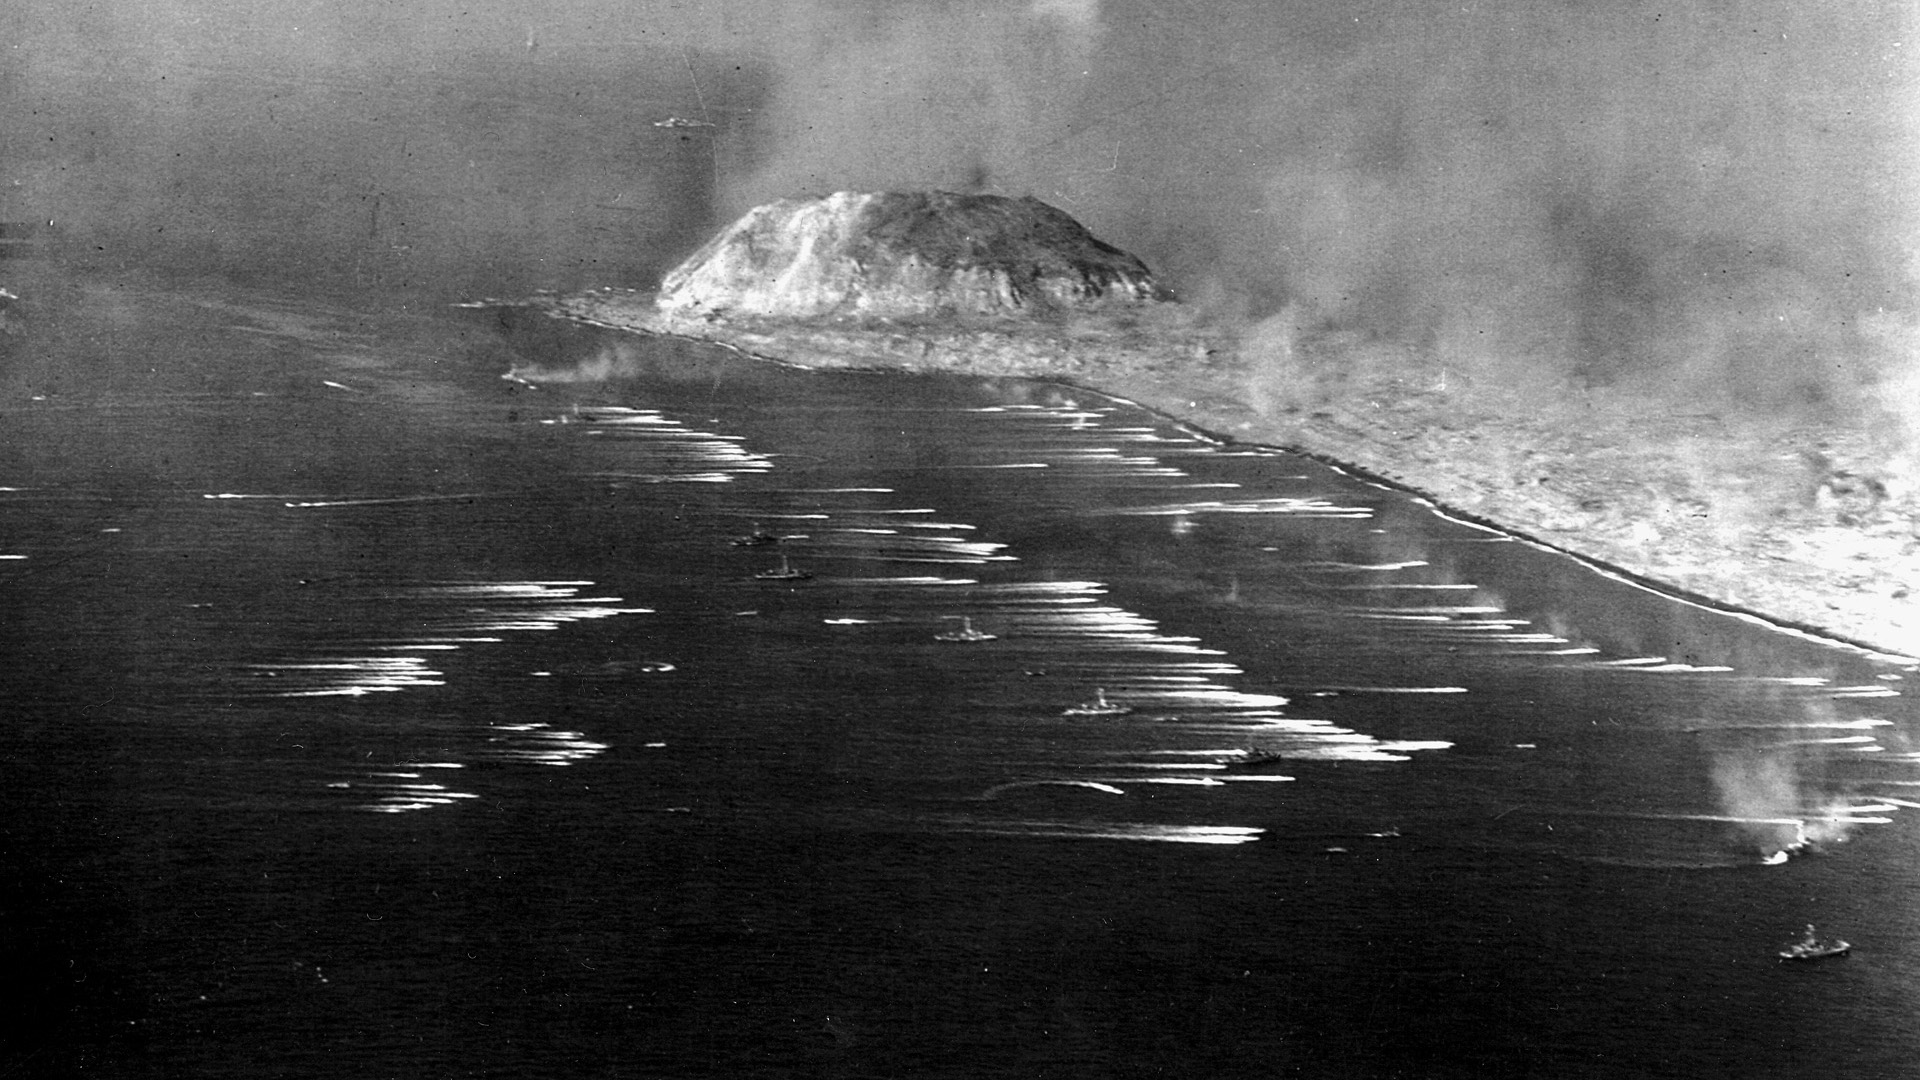 Mount Suribachi was a fortress in more ways than one. Aside from its imposing height it contained seven stories of tunnels, living quarters, and virtually every weapon in the enemy’s arsenal.